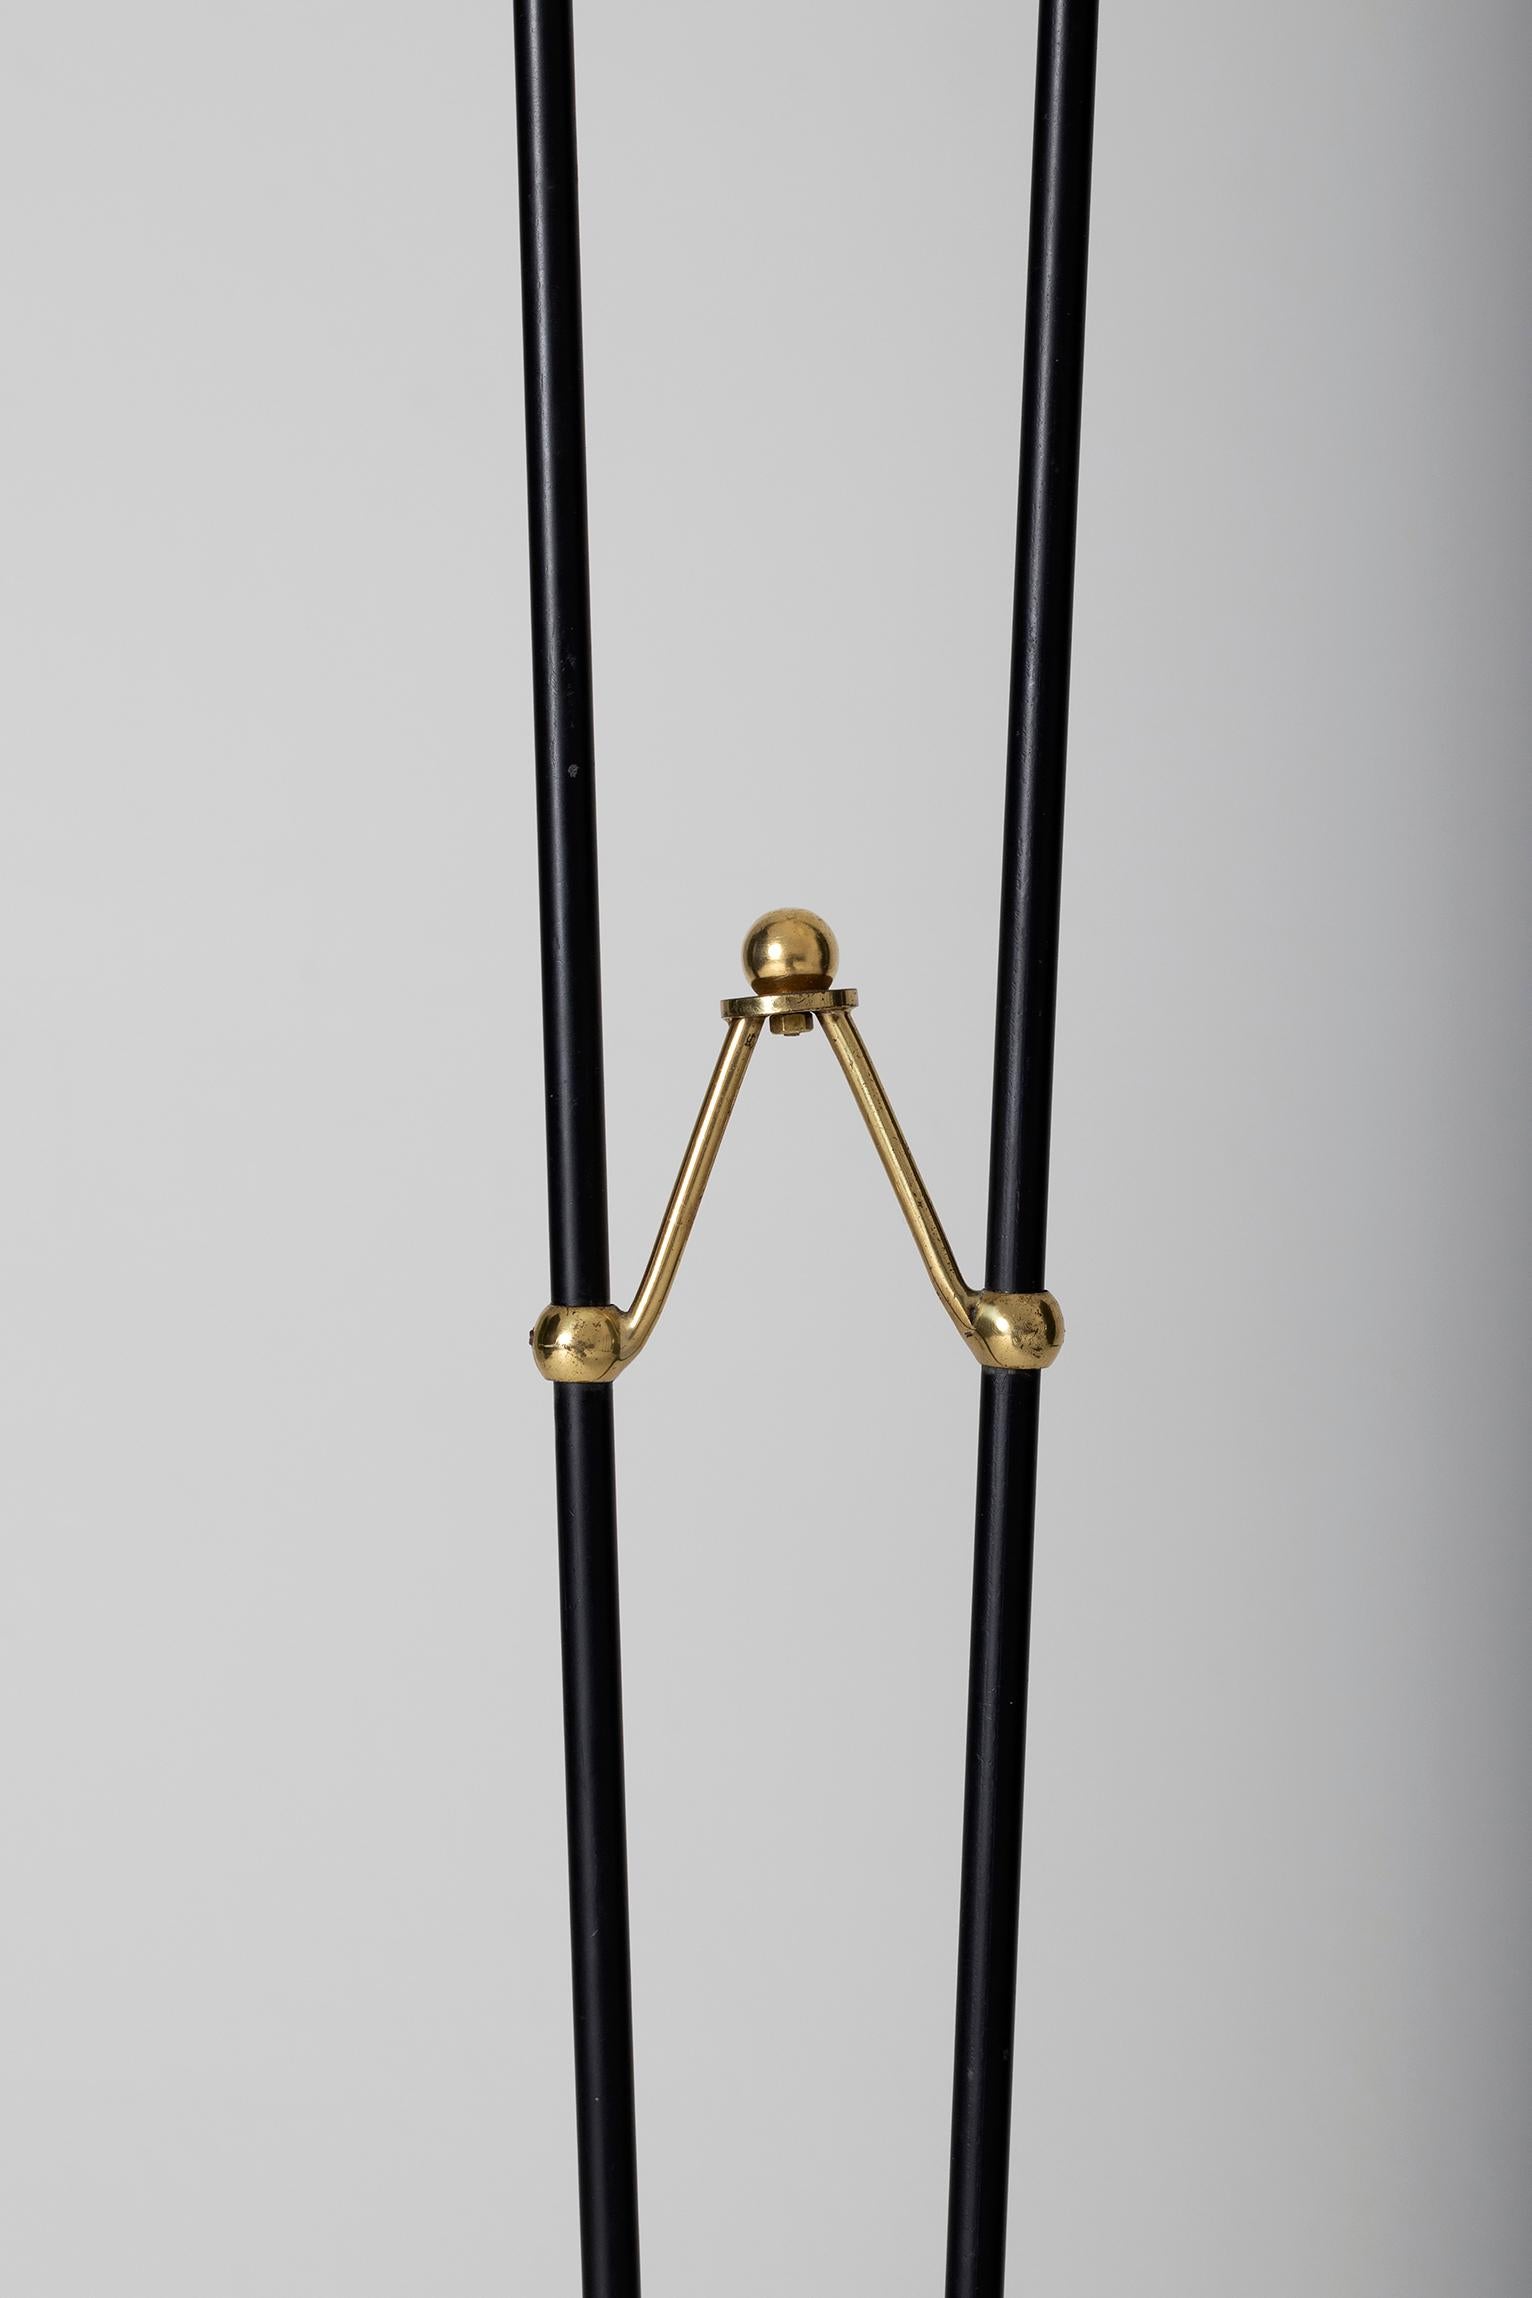 French Midcentury Brass and Black Two-Arm Floor Lamp